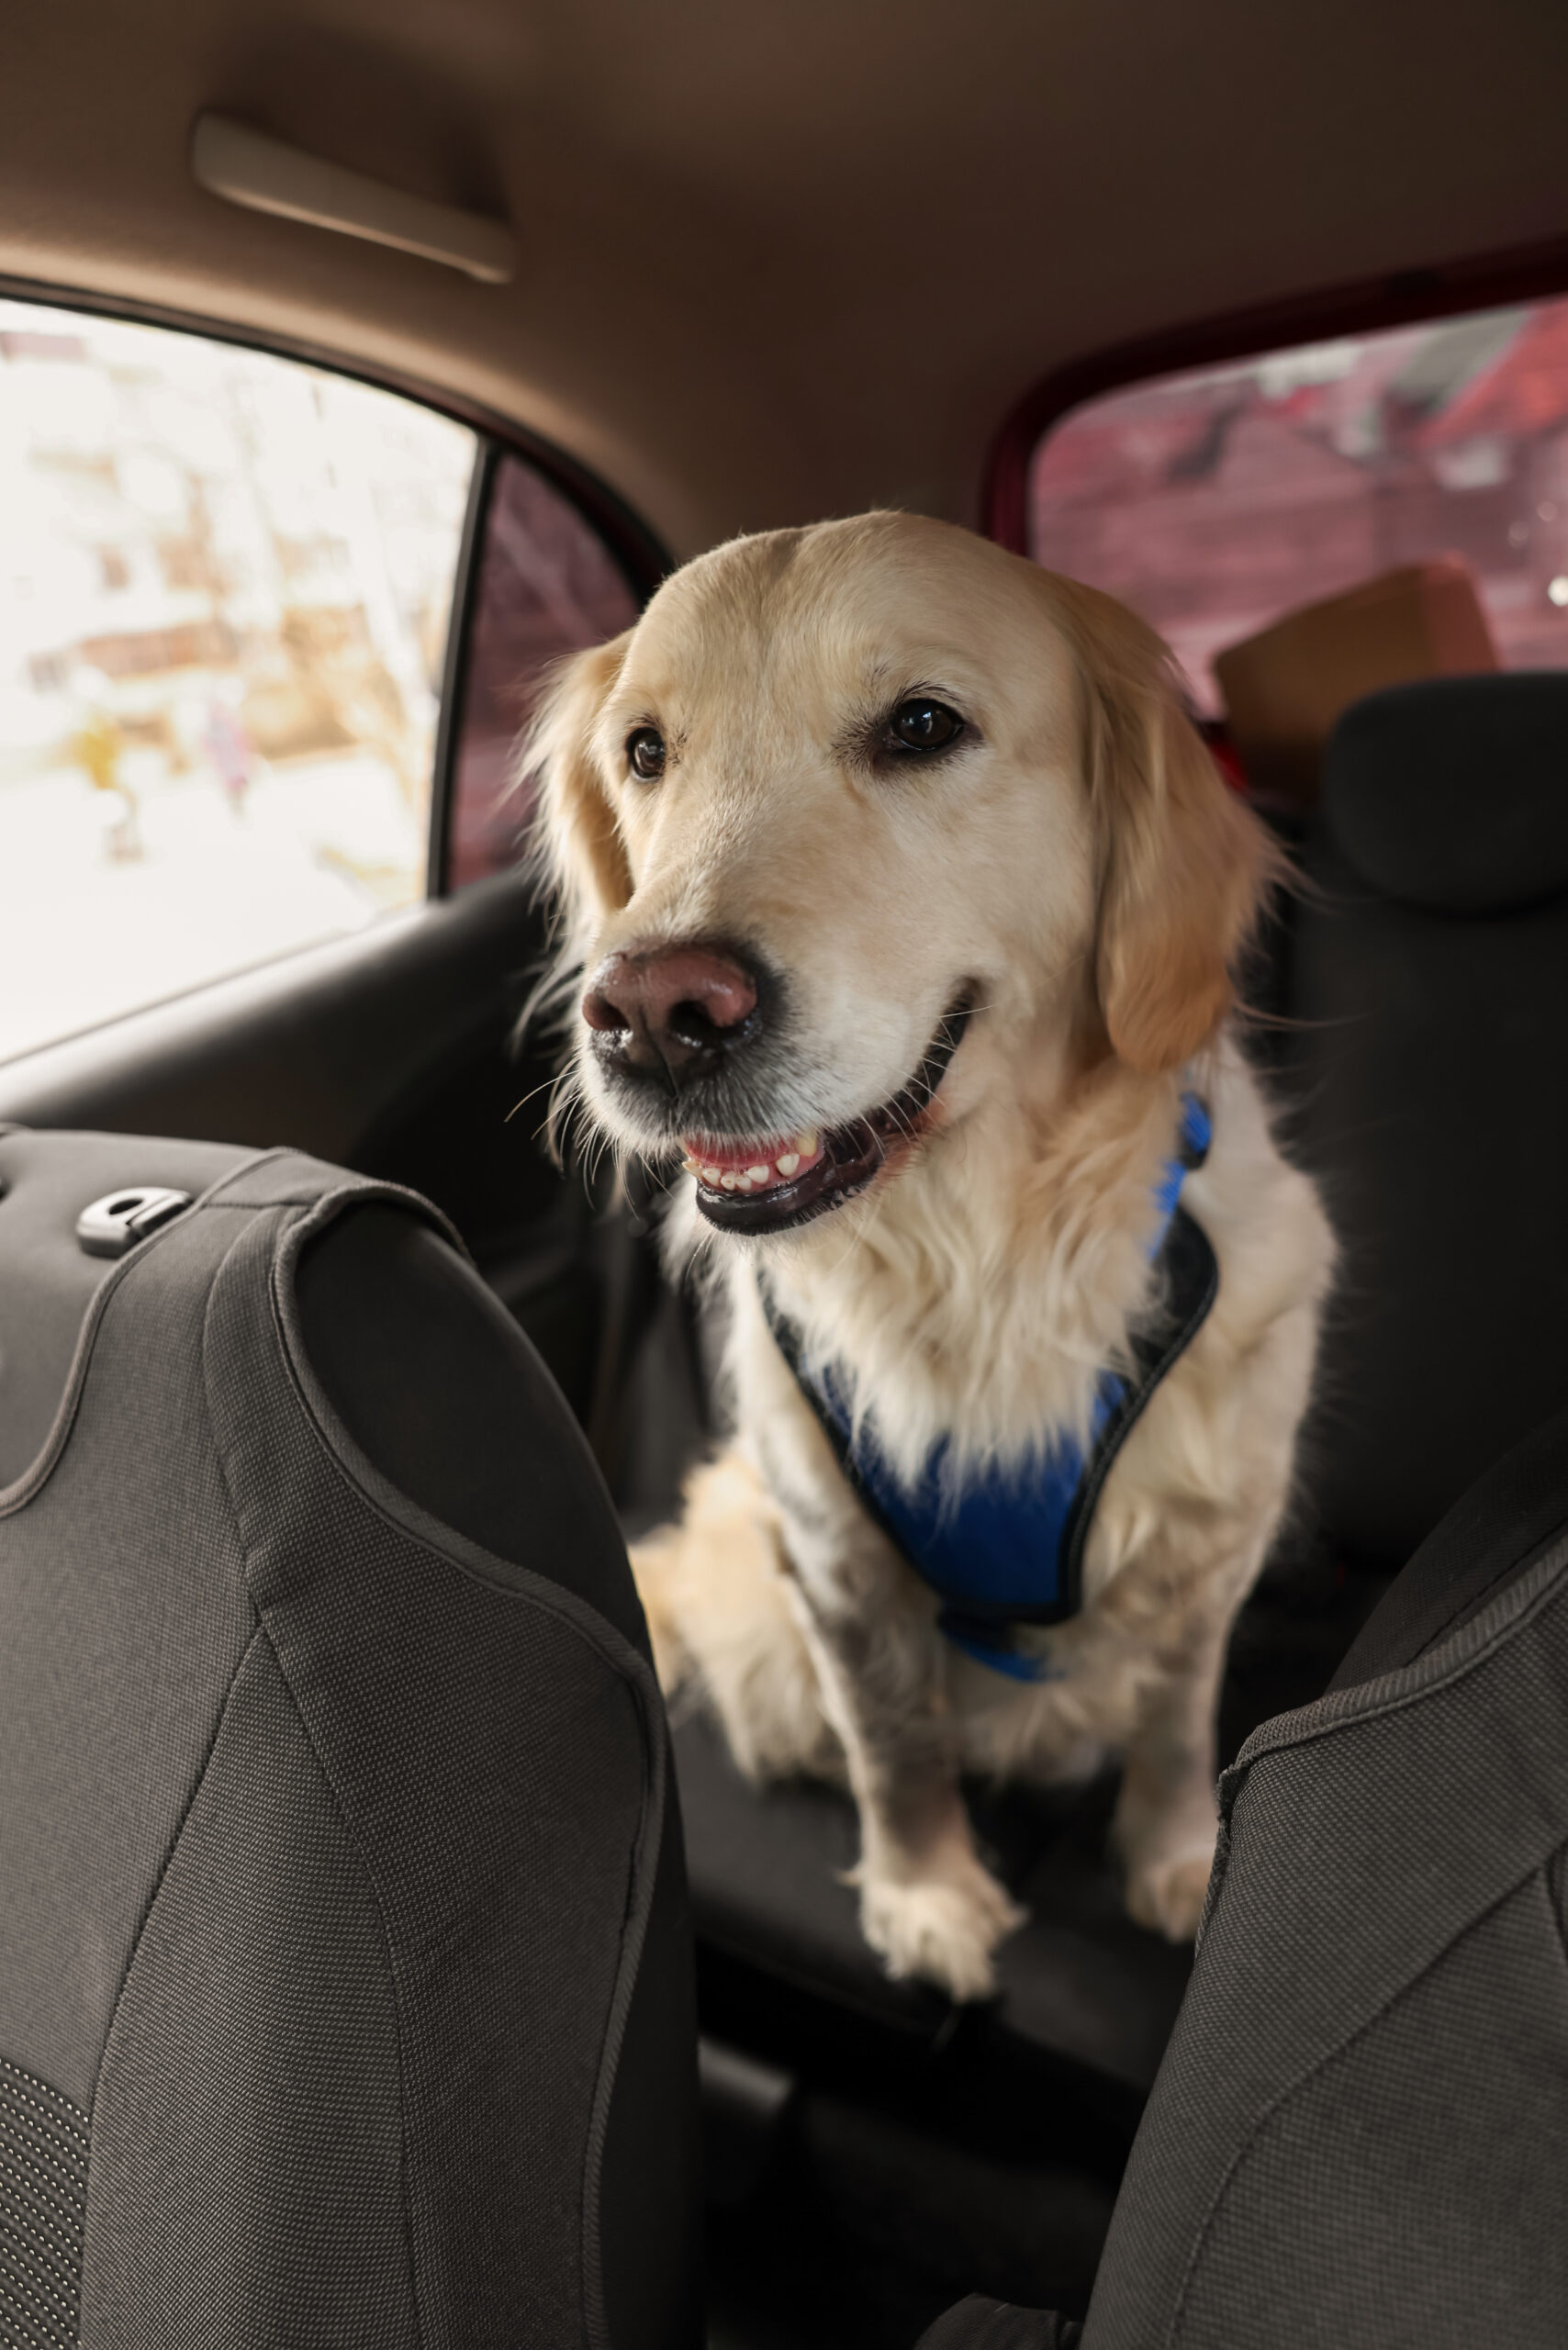 Tips for How to Calm Your Dog in the Car